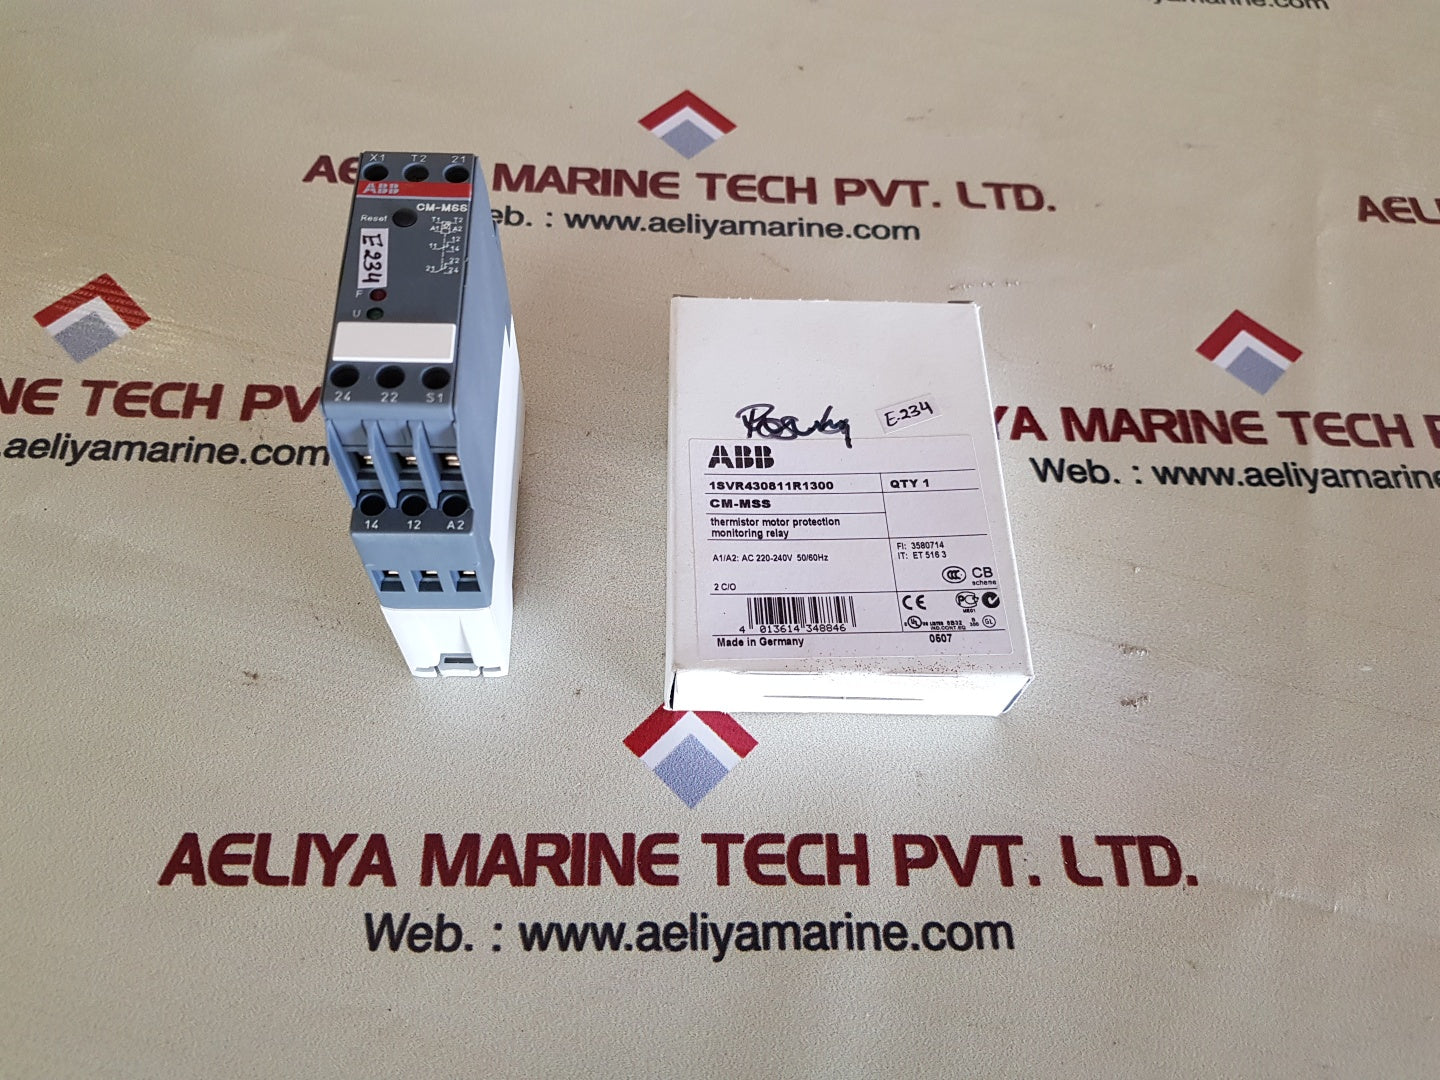 Abb cm-mss 1svr430811r1300 thermistor motor protection monitoring relay